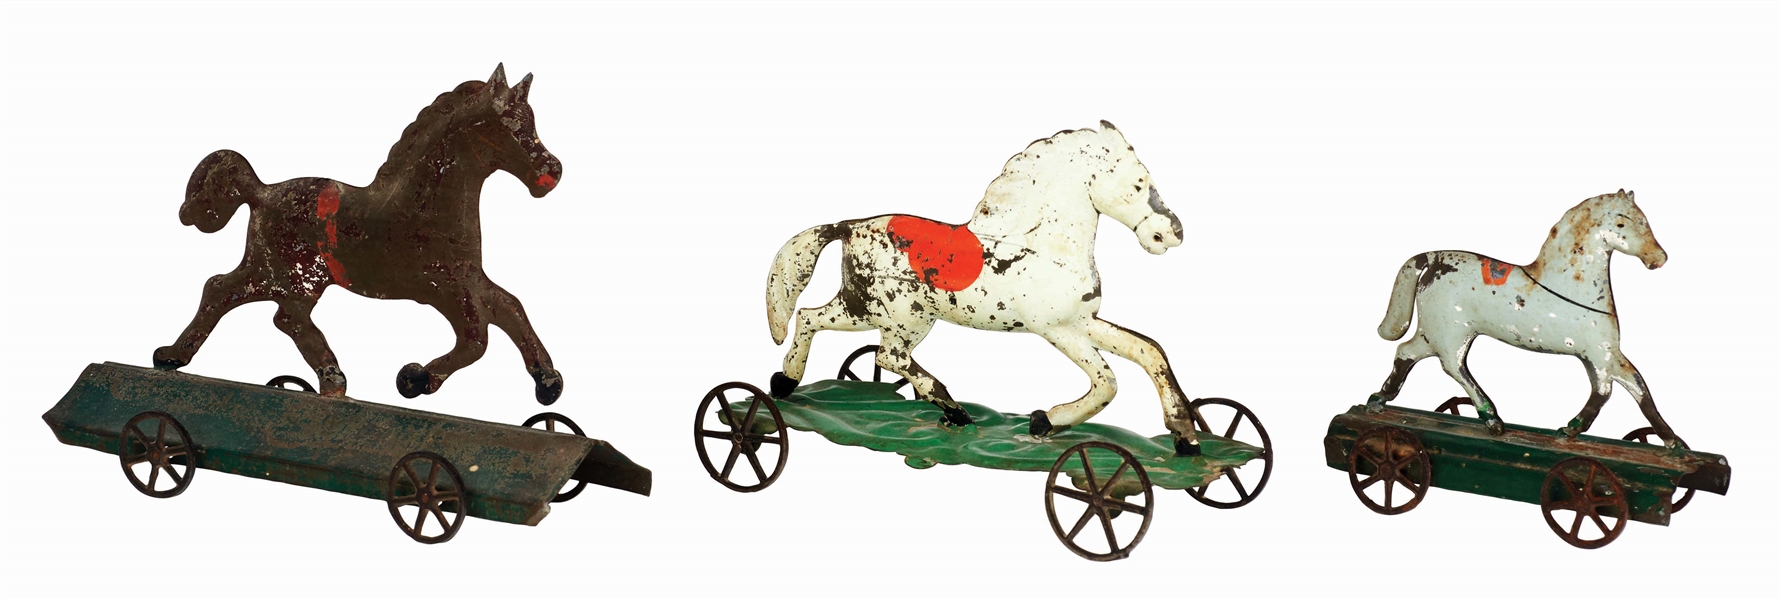 LOT OF 3: EARLY AMERICAN TIN HORSE ON PLATFORM TOYS.